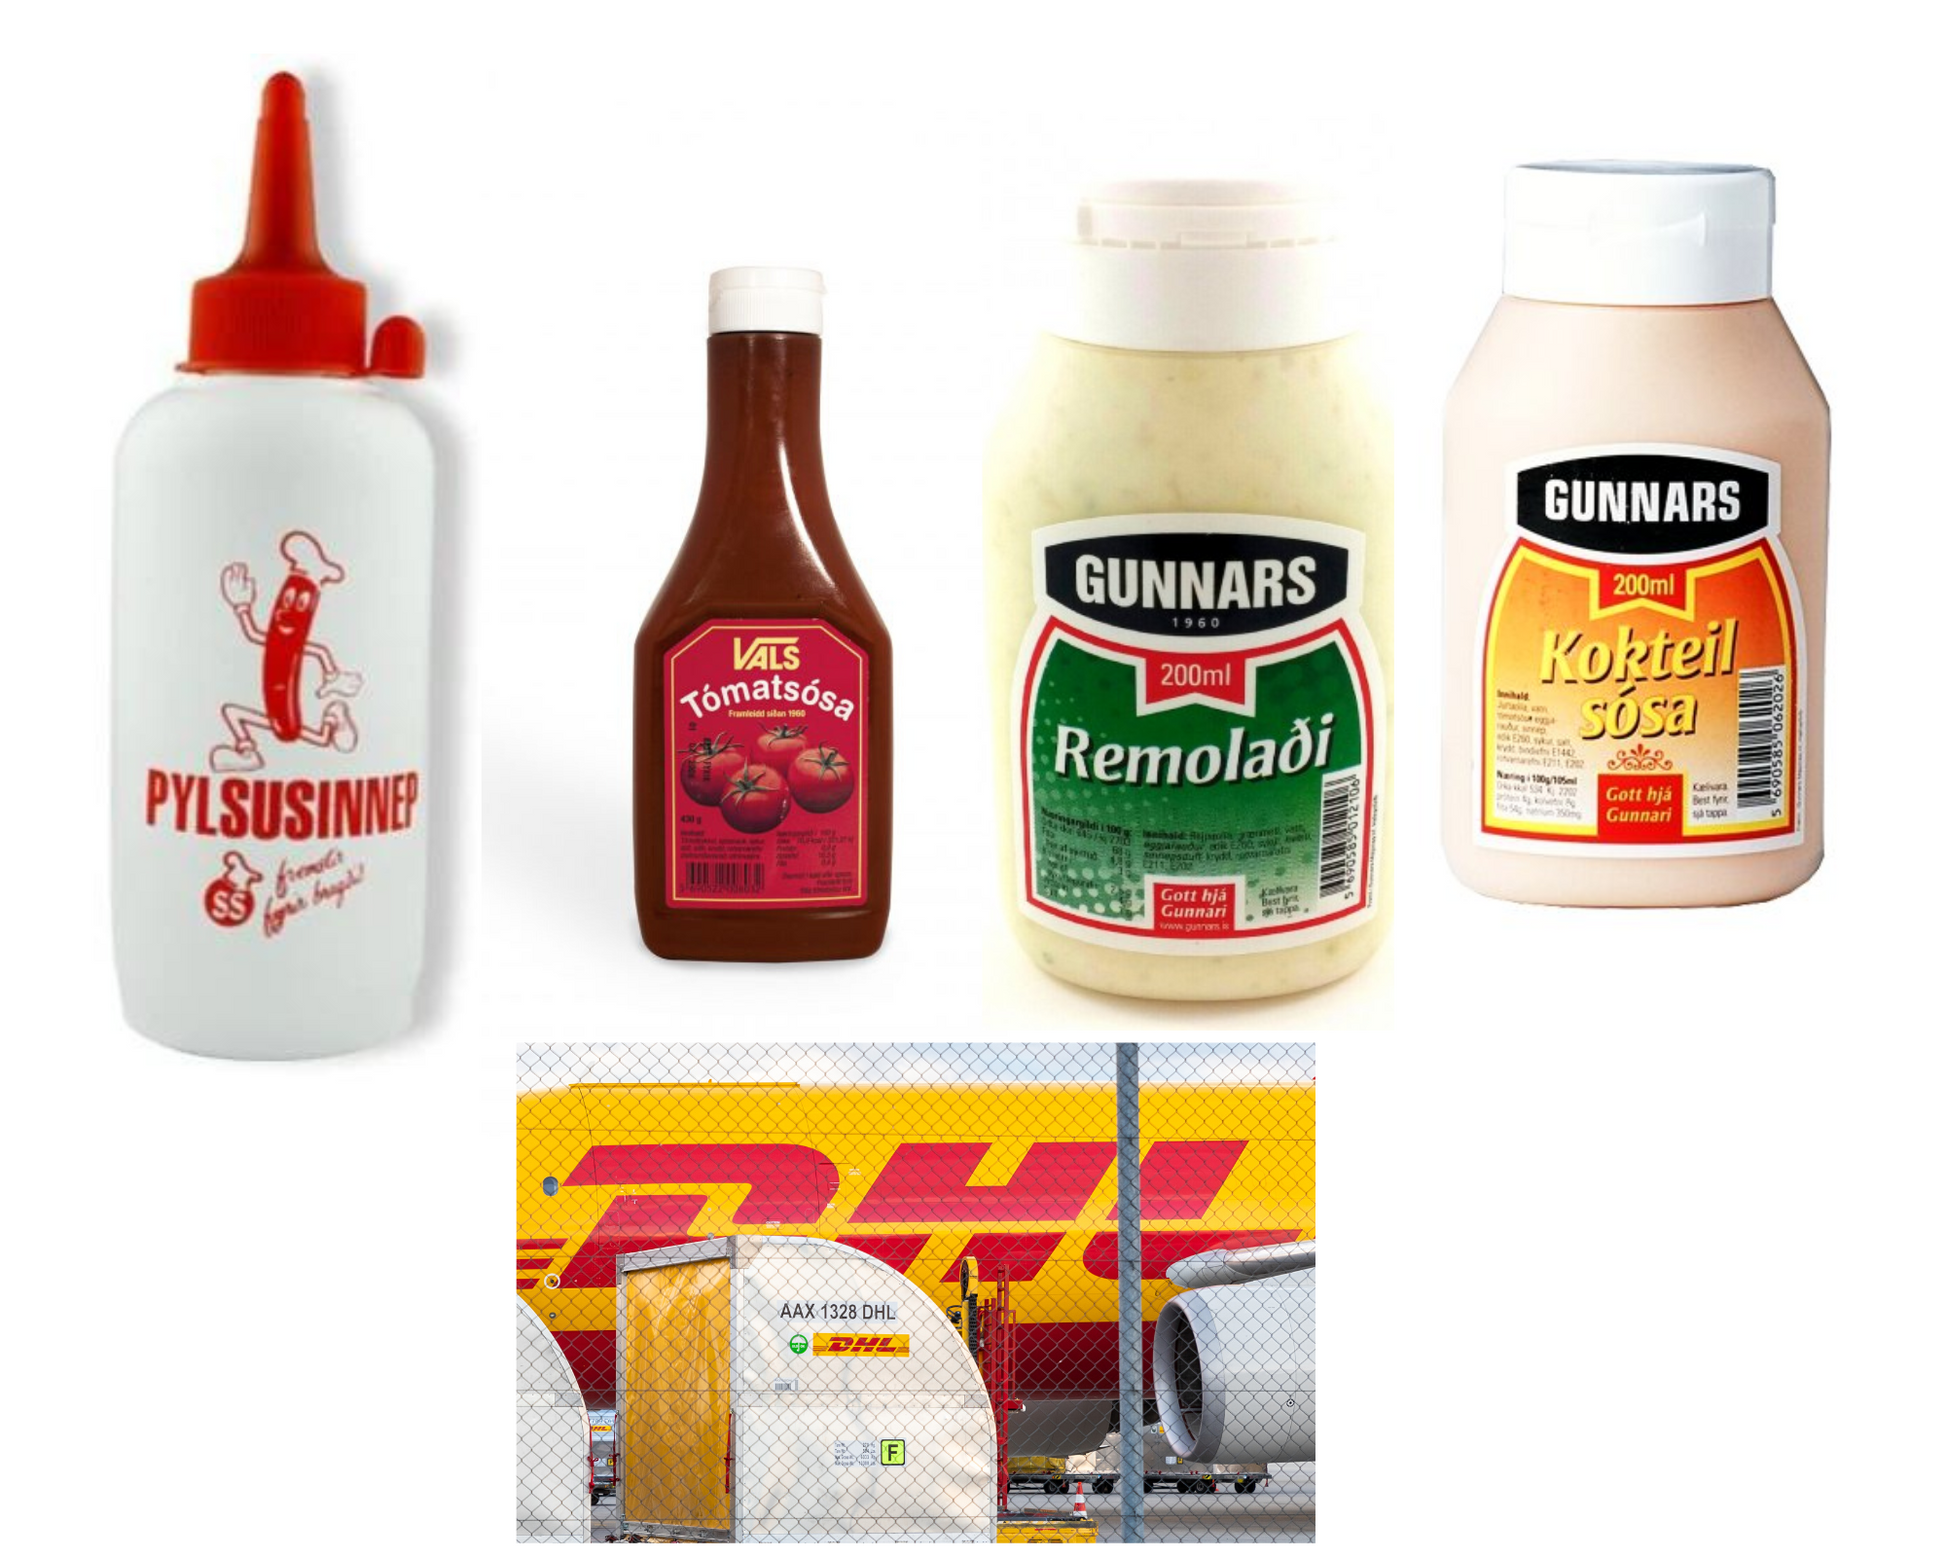 This bundle features a selection of our most sought-after Icelandic condiments. These condiments are expertly blended for the perfect balance of flavor and texture. They're sure to provide a unique taste experience with every bite. - Topiceland